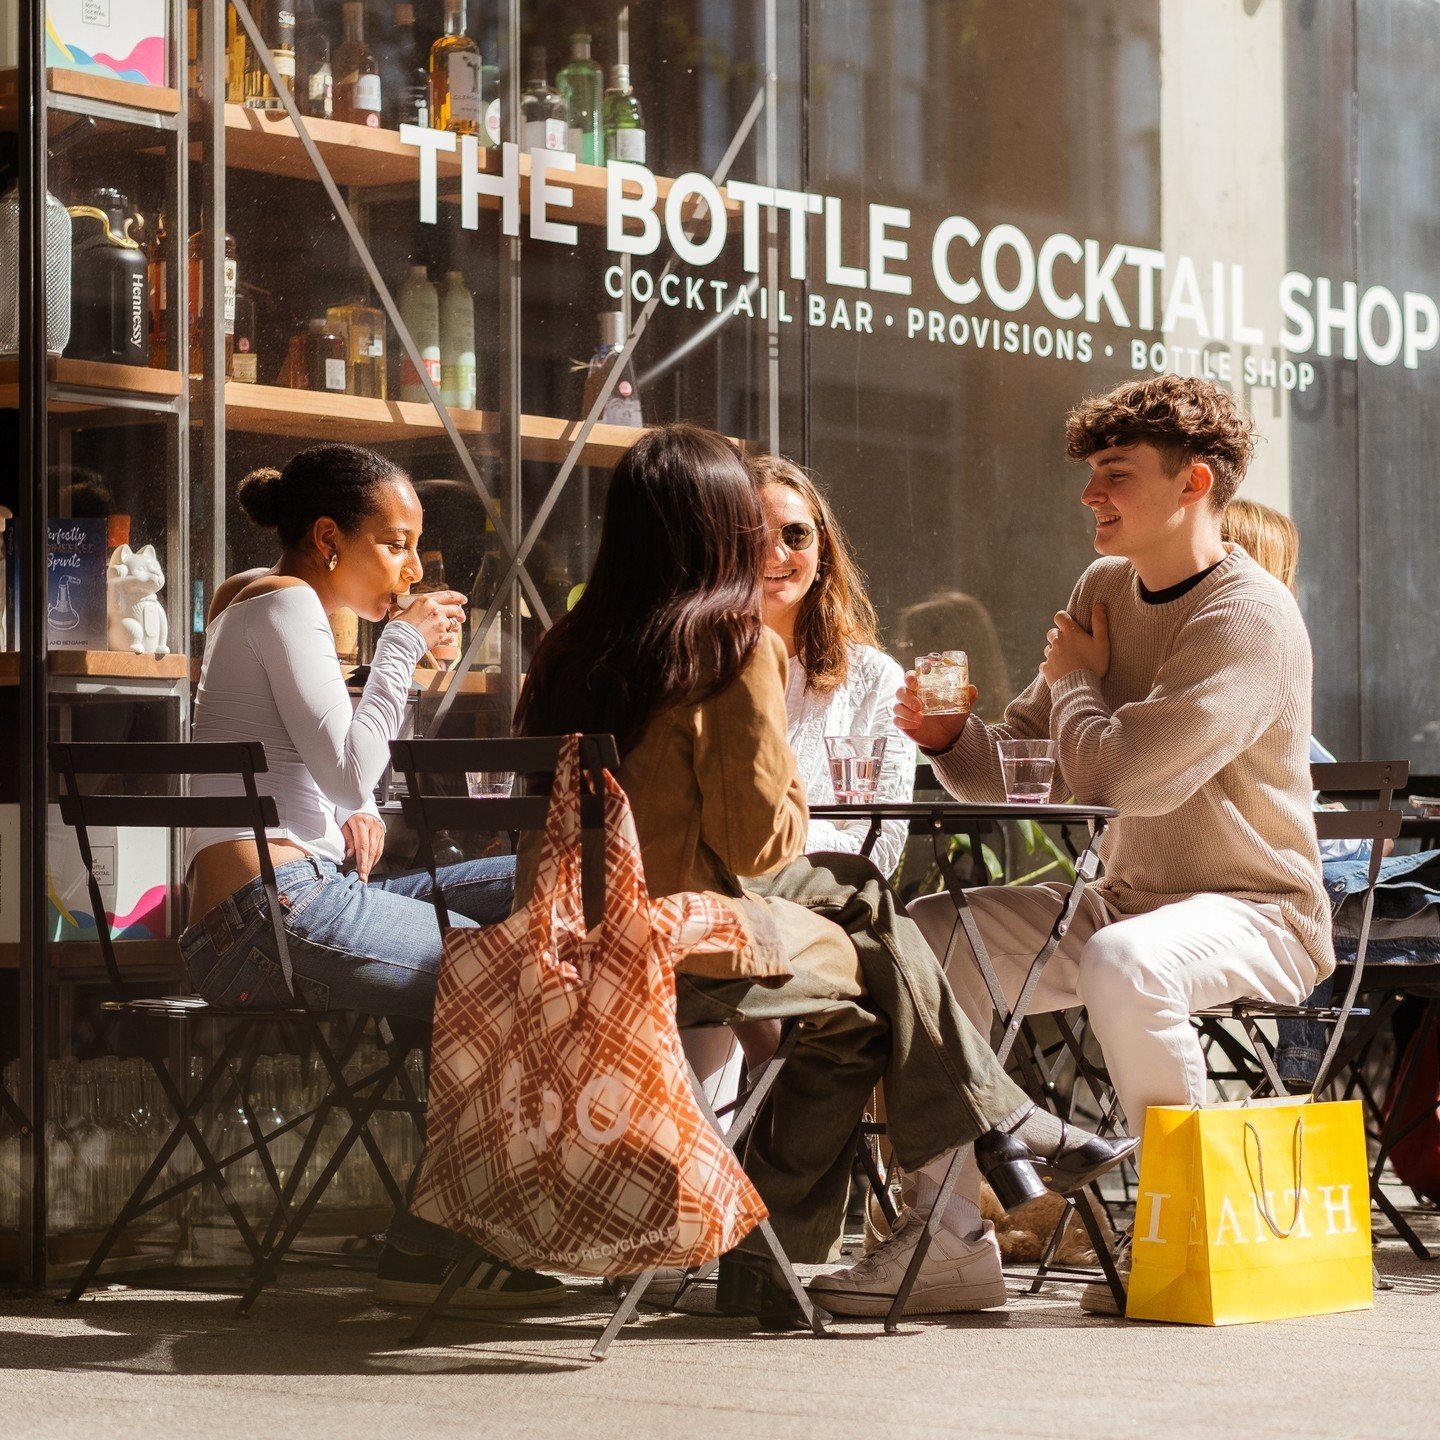 Summer is just around the corner ☀️ 

Gather with friends at @thebottlecocktailshop and welcome the month of May with a cocktail in hand 🍸

🔗 Click the link in bio to discover what's on in Islington Square in May including food and drink masterclas